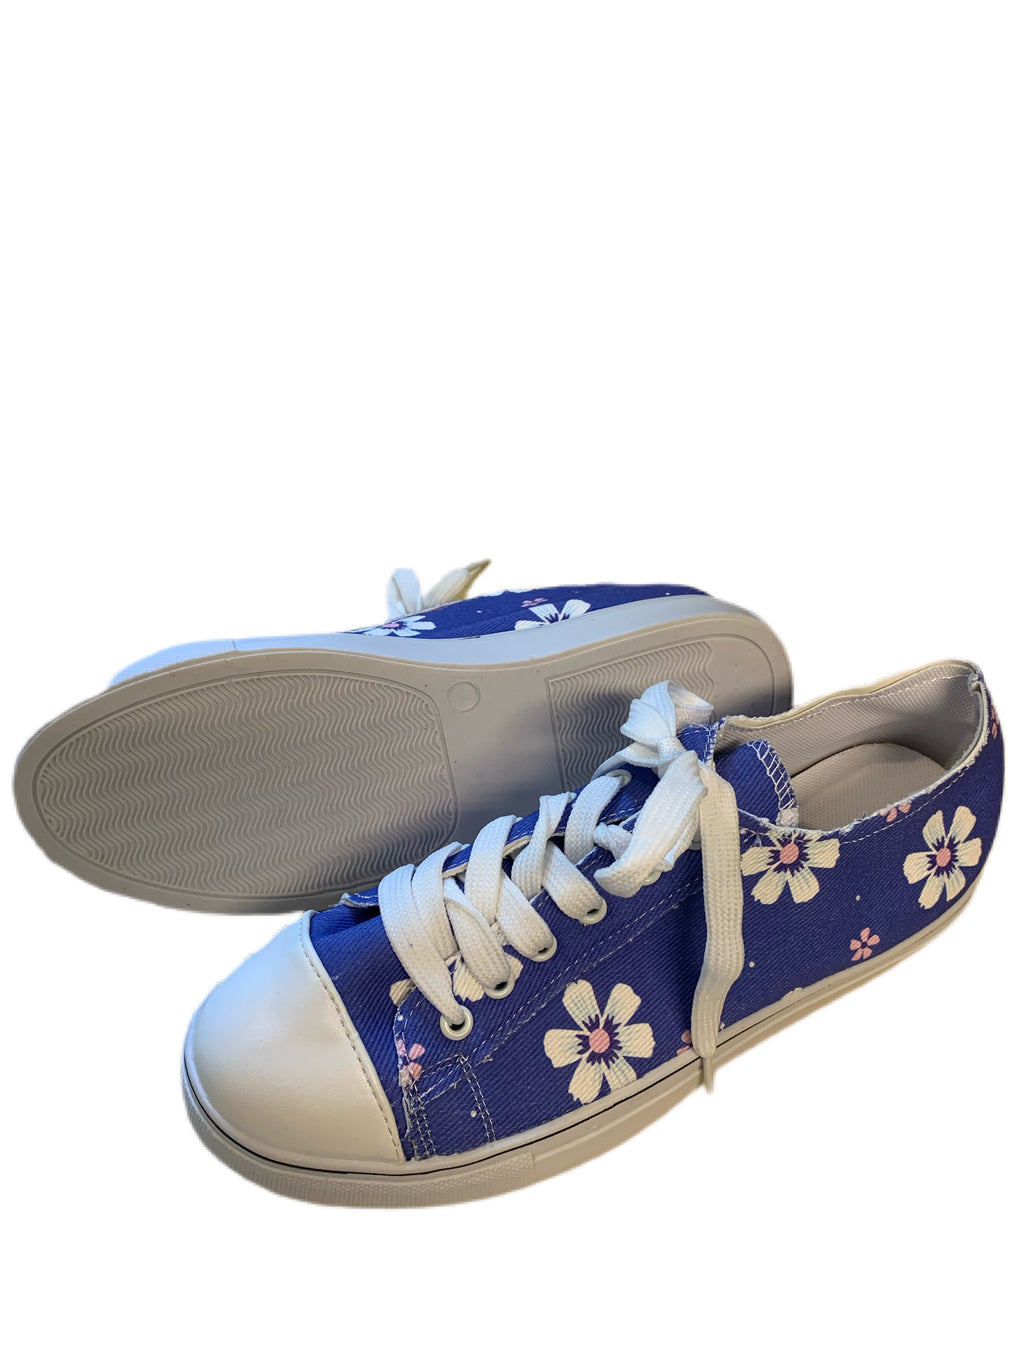 periwinkle daisy print sneakers